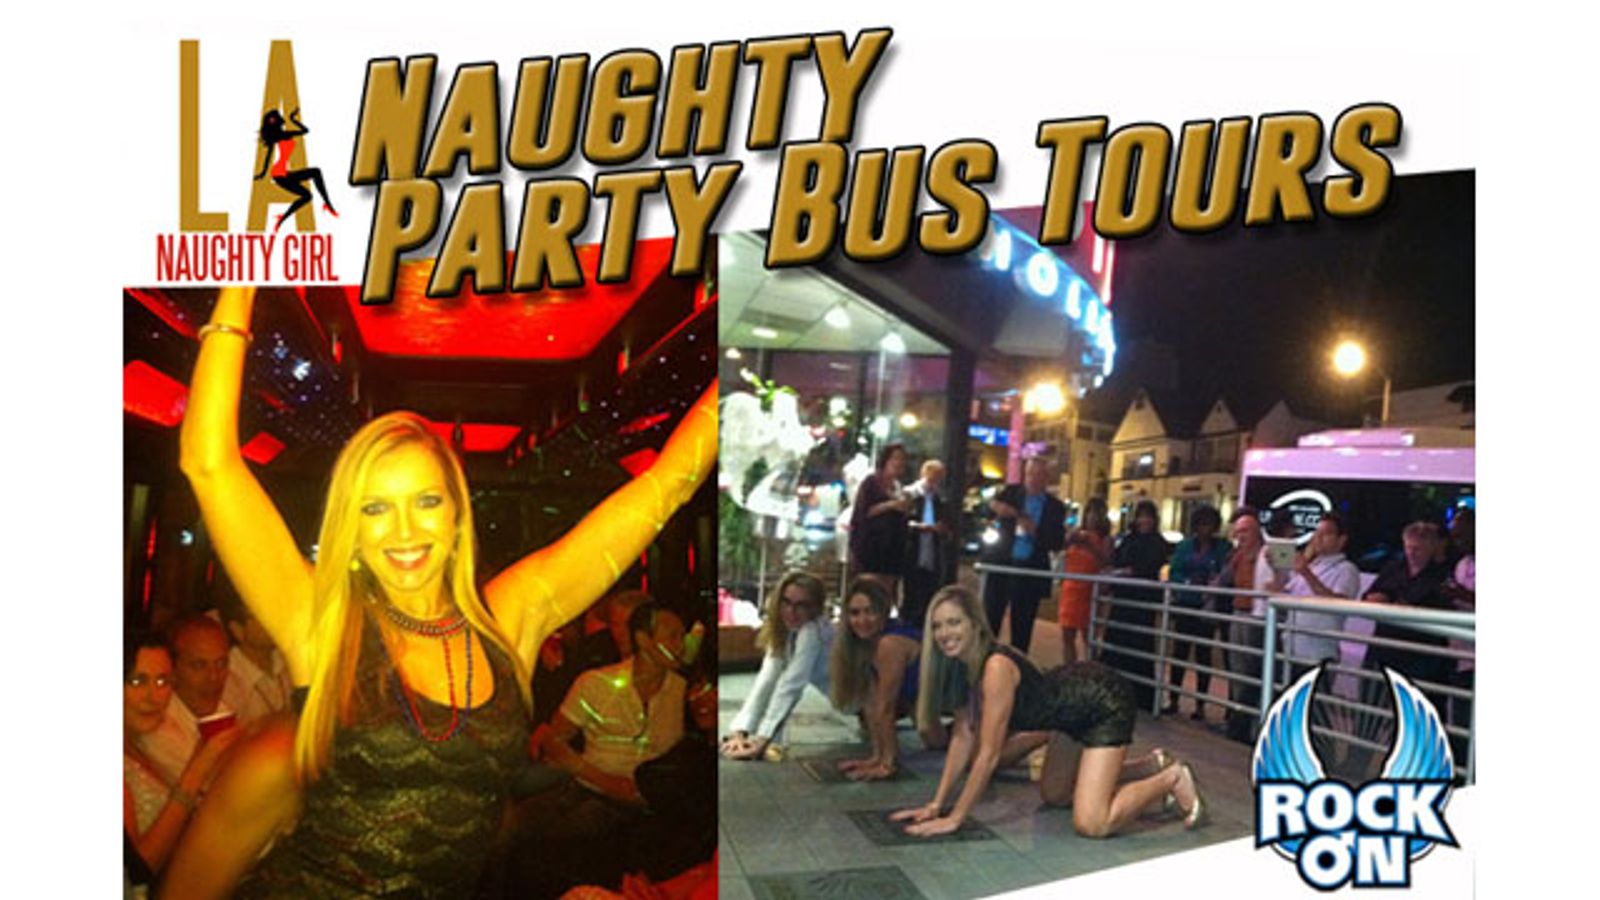 Sienna Sinclair, Rock On Debut Naughty Party Bus Tours of L.A.